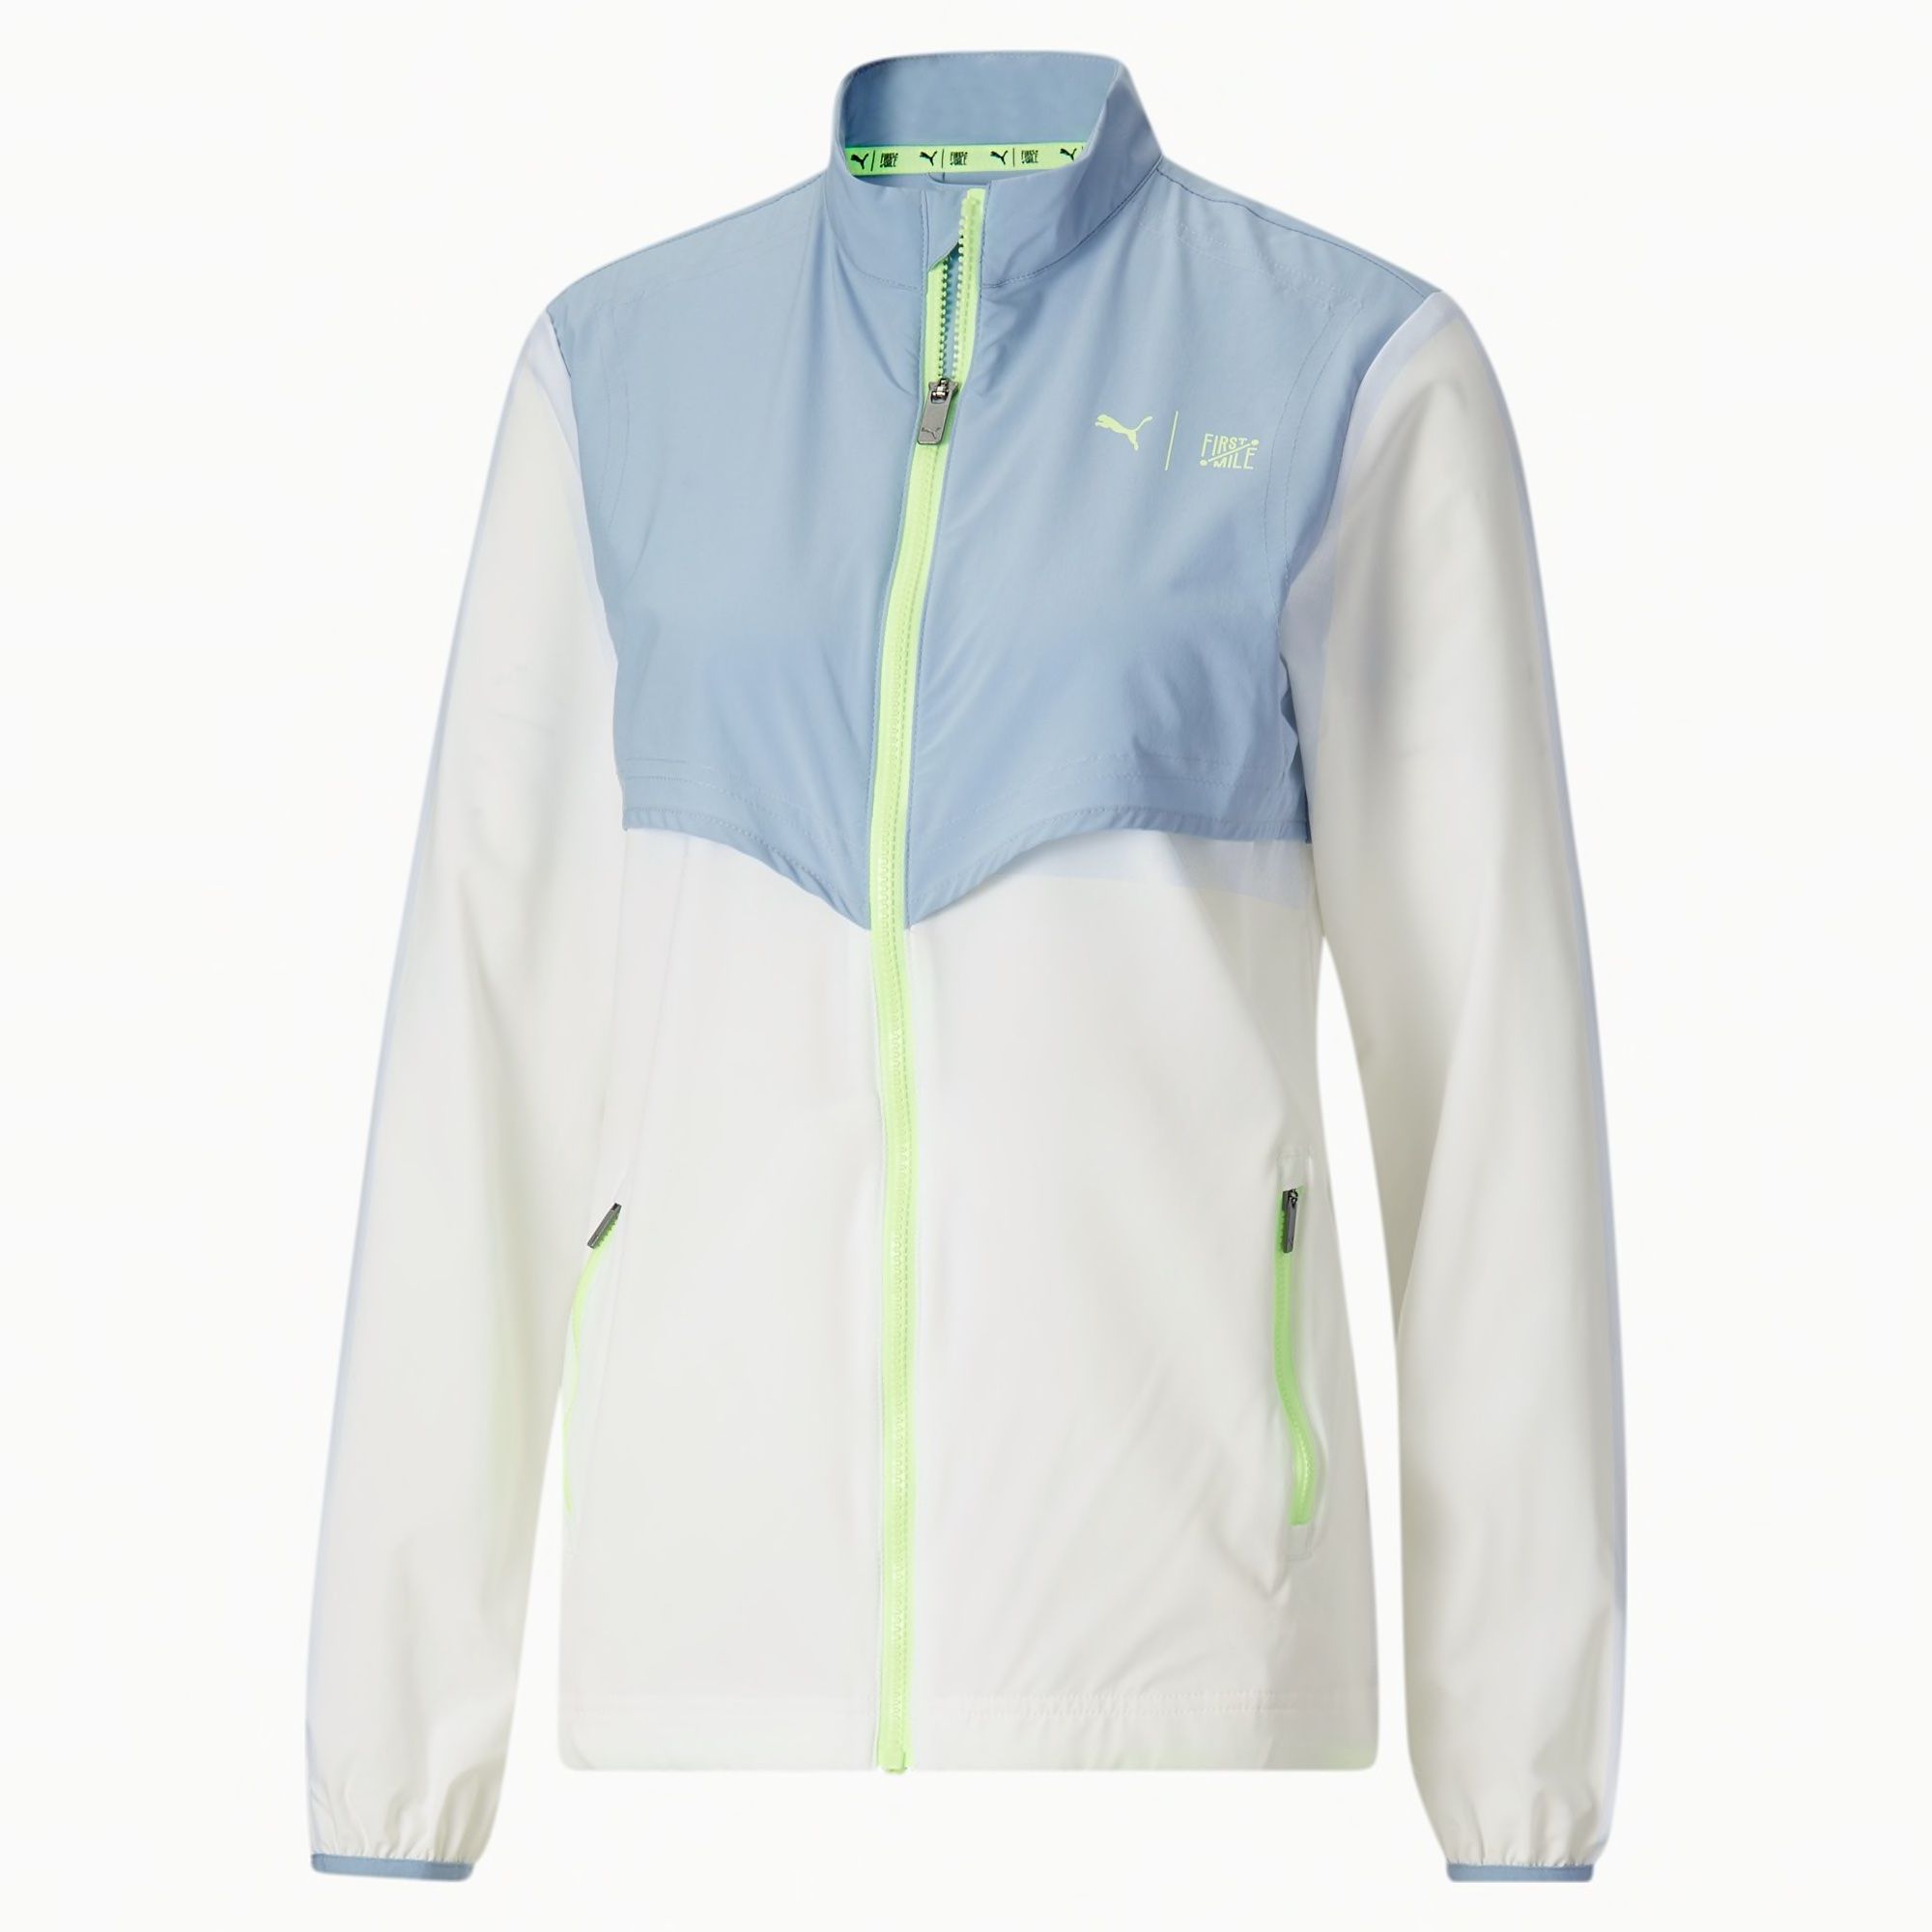  PUMA x FIRST MILE Woven Running Jacket - White / Wash Blue 